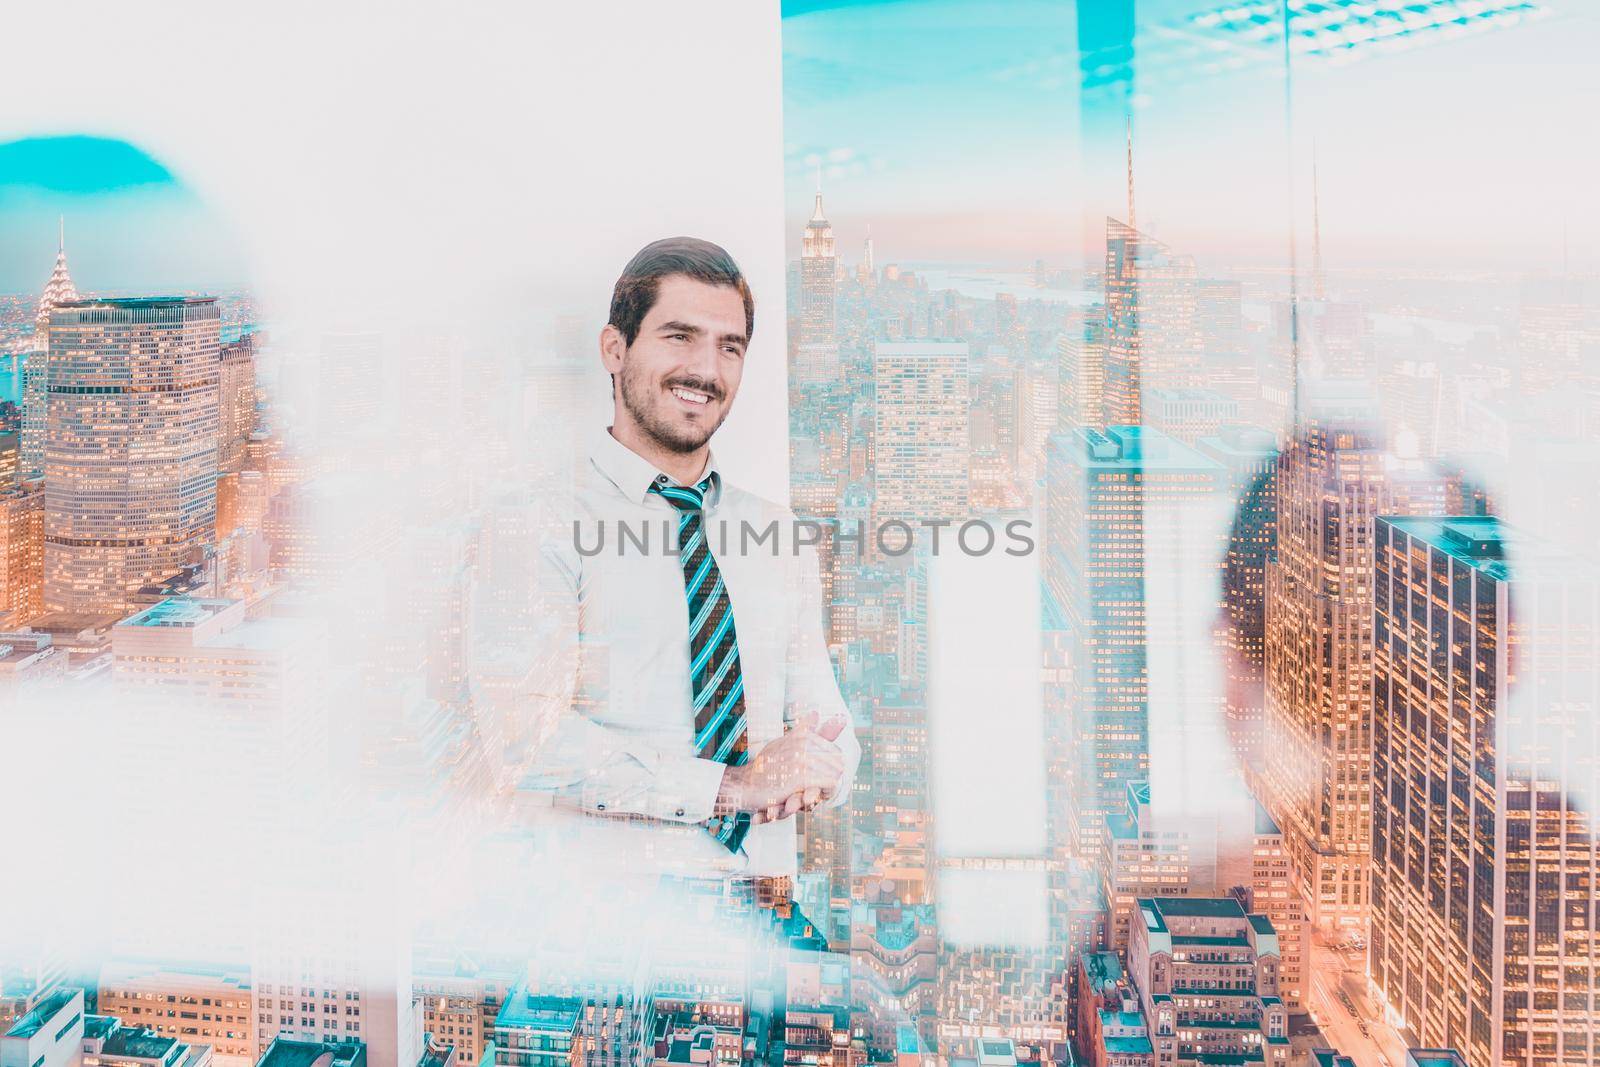 Relaxed cheerful team leader and business owner leading informal in-house business meeting. Business and entrepreneurship concept. New Your city lights reflection in window glass.